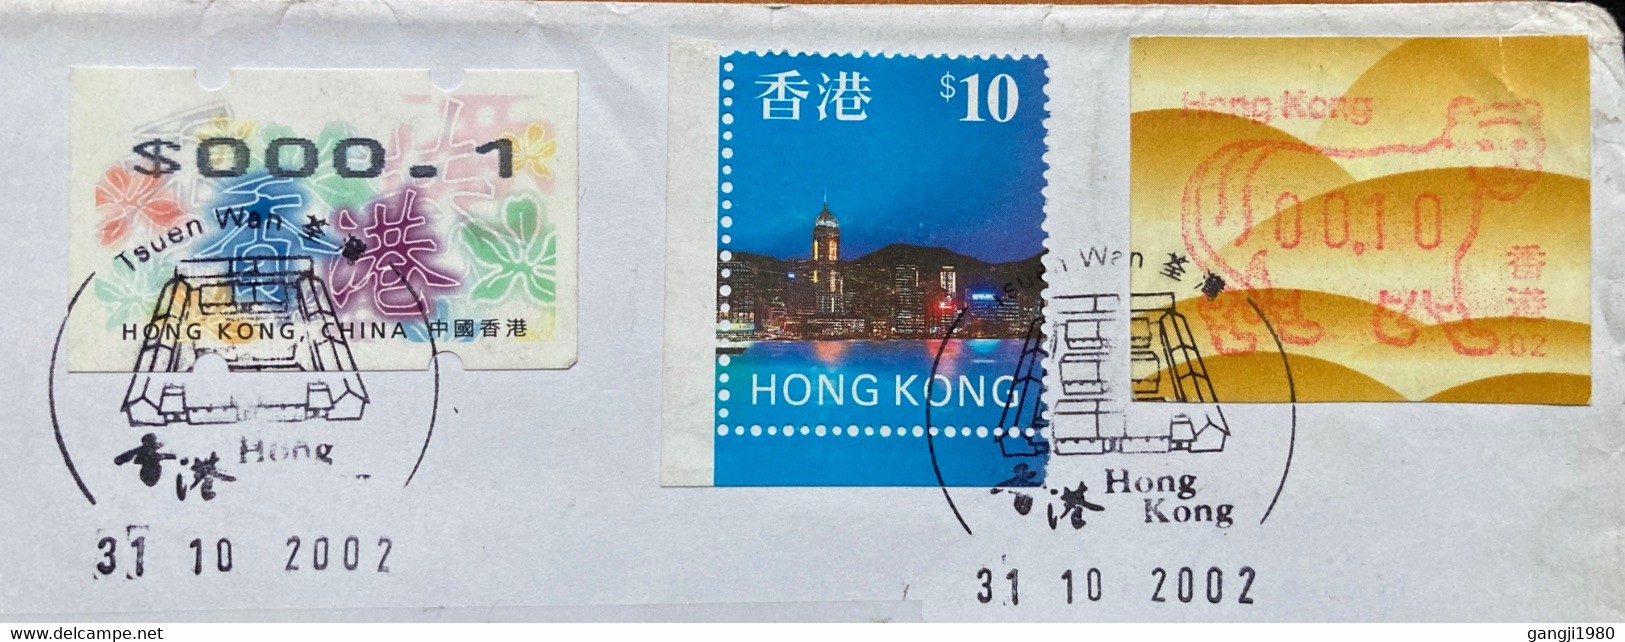 HONG KONG 2002, HIGH VALUE 10$ ,TIGER BULL, ATM SELF ADHESIVE,BUILDING,VIEW OF CITY 6 STAMPS USED COVER TO INDIA - Lettres & Documents